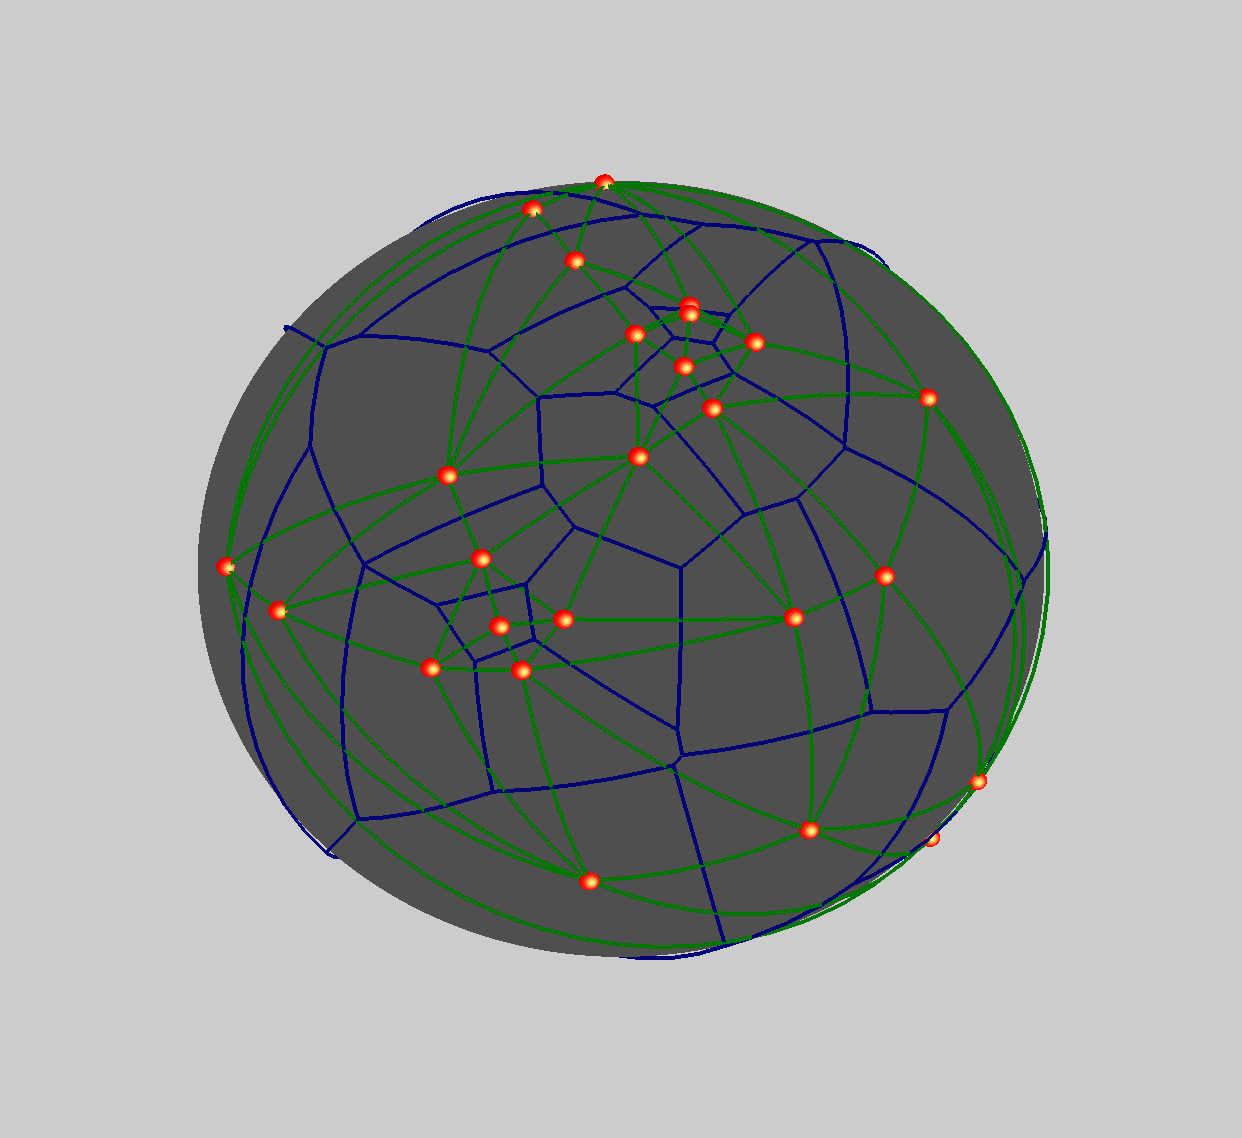 Figure 1 shows 25 random points on the surface of a sphere together with the Delaunay triangulation and the corresponding Voronoi tessellation.